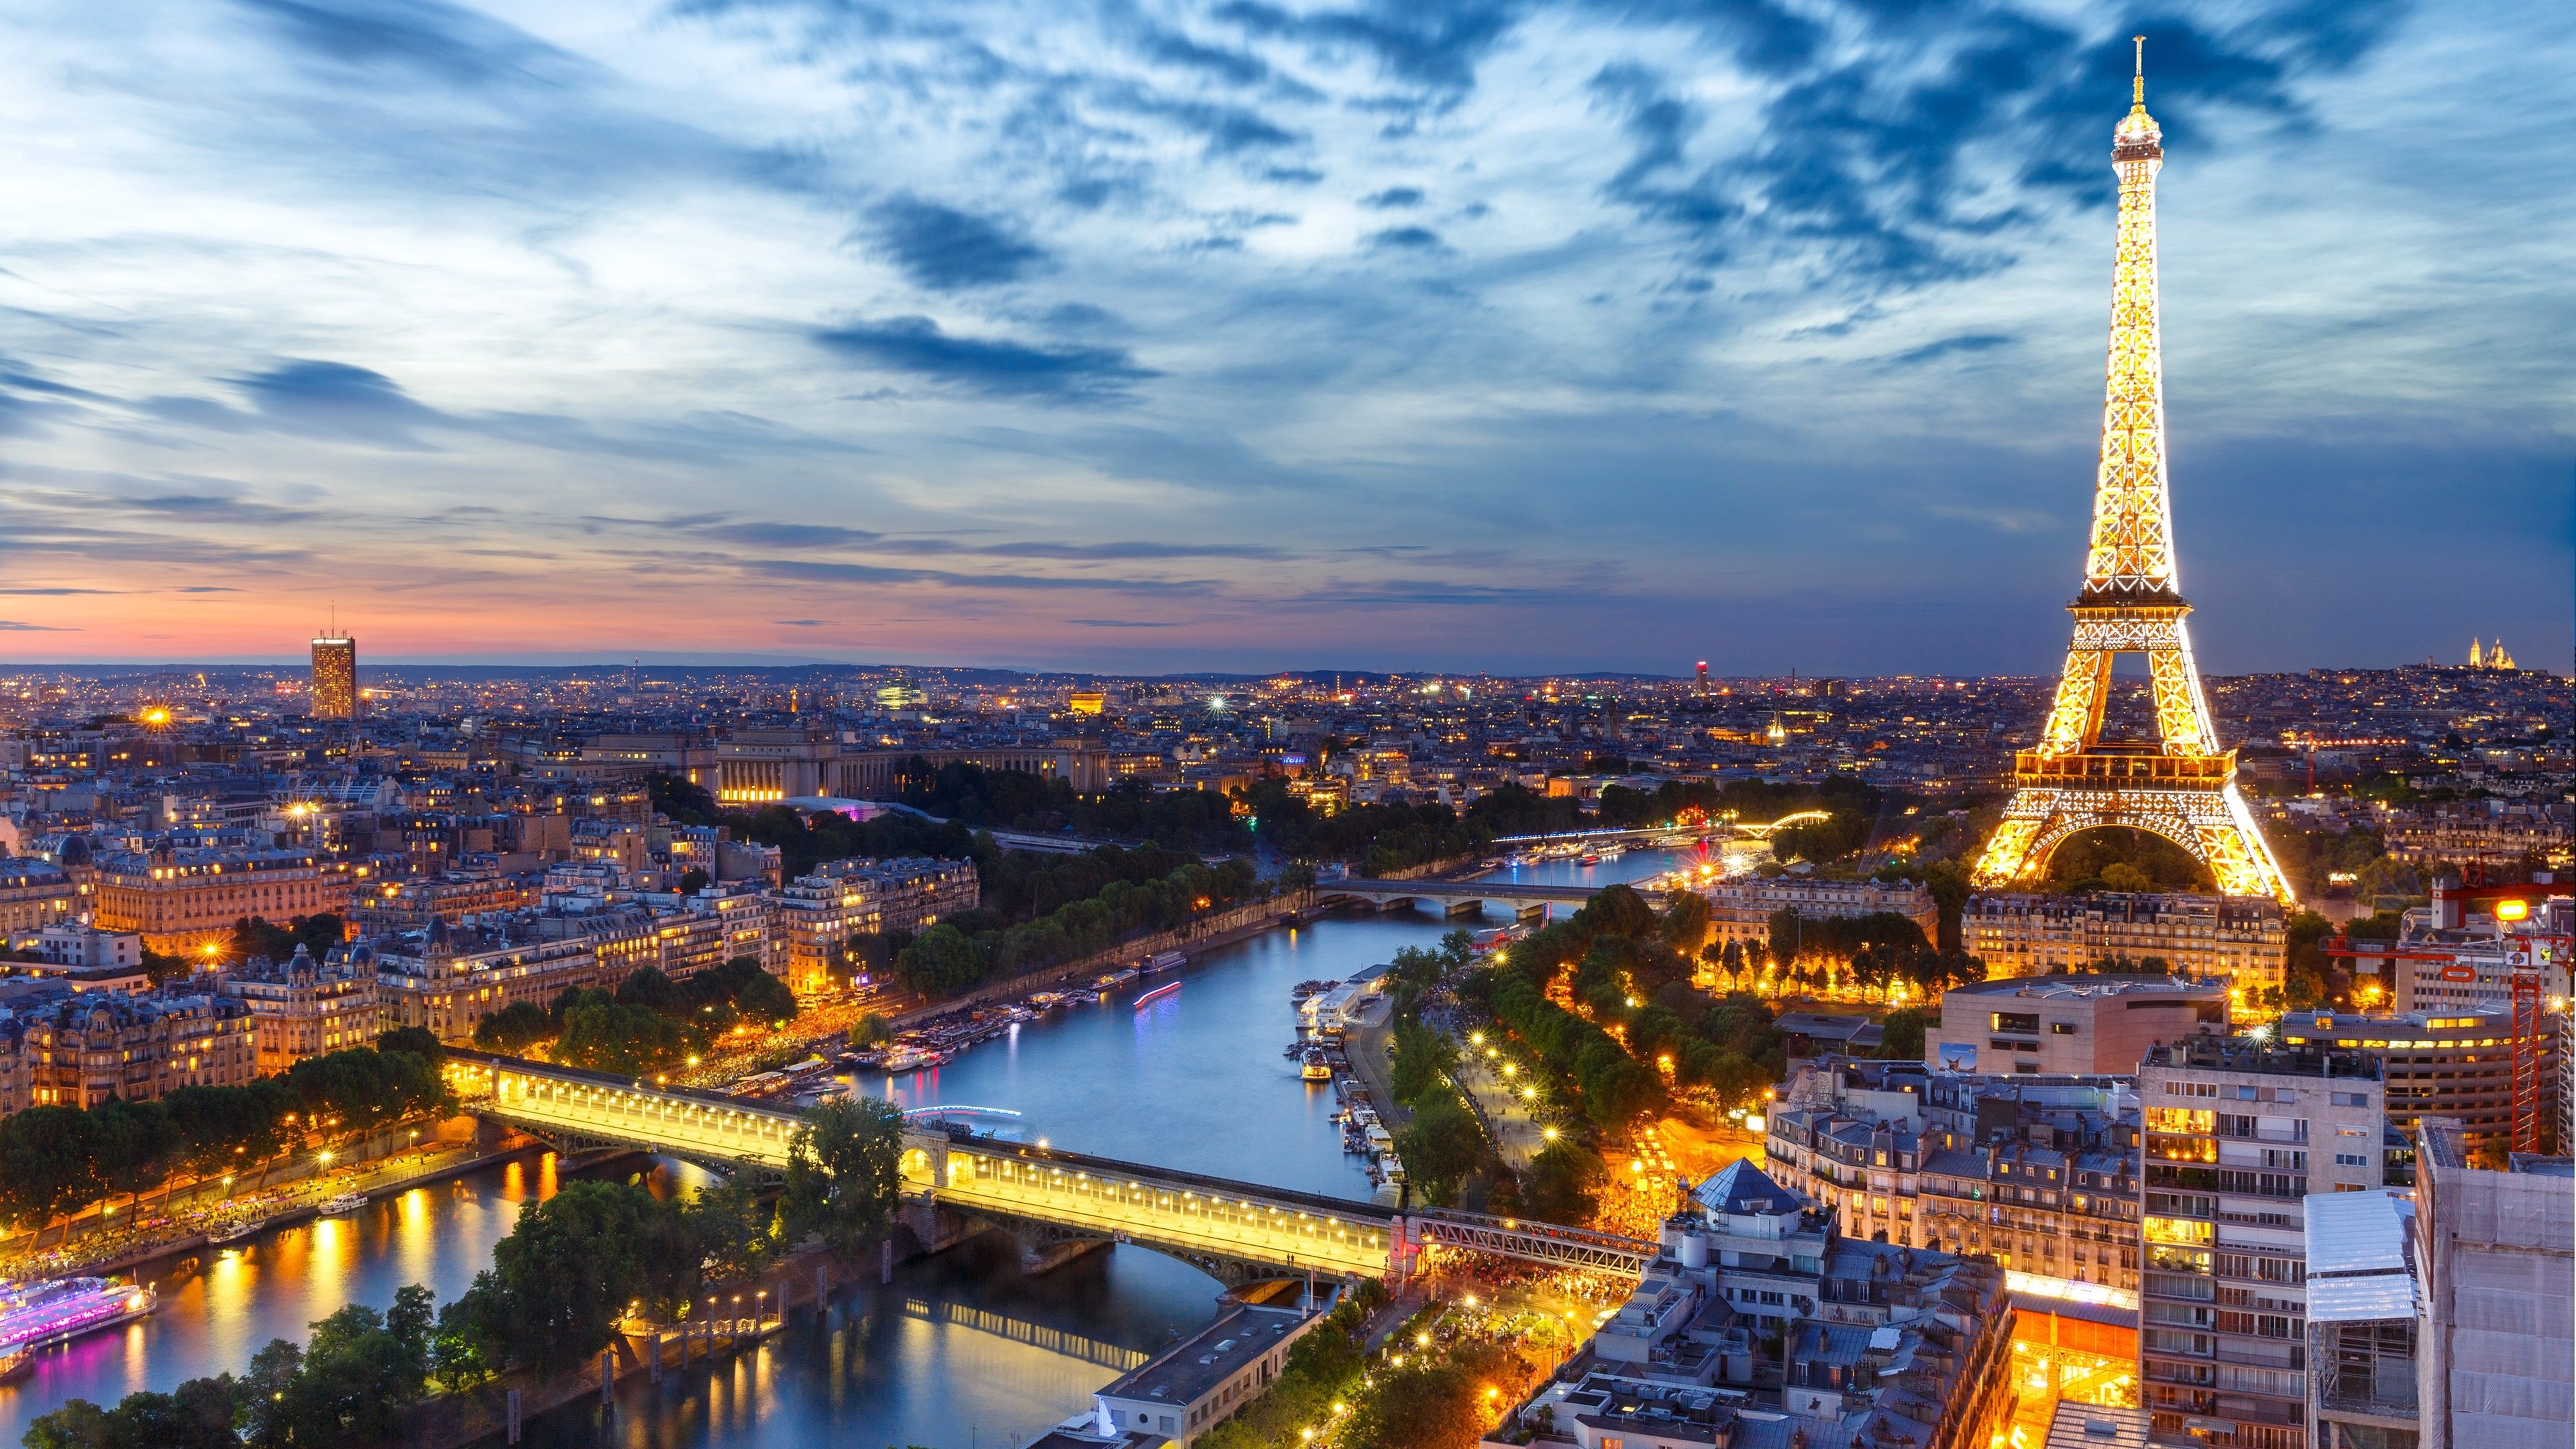 Paris: The capital and most populous city of France. 3840x2160 4K Wallpaper.